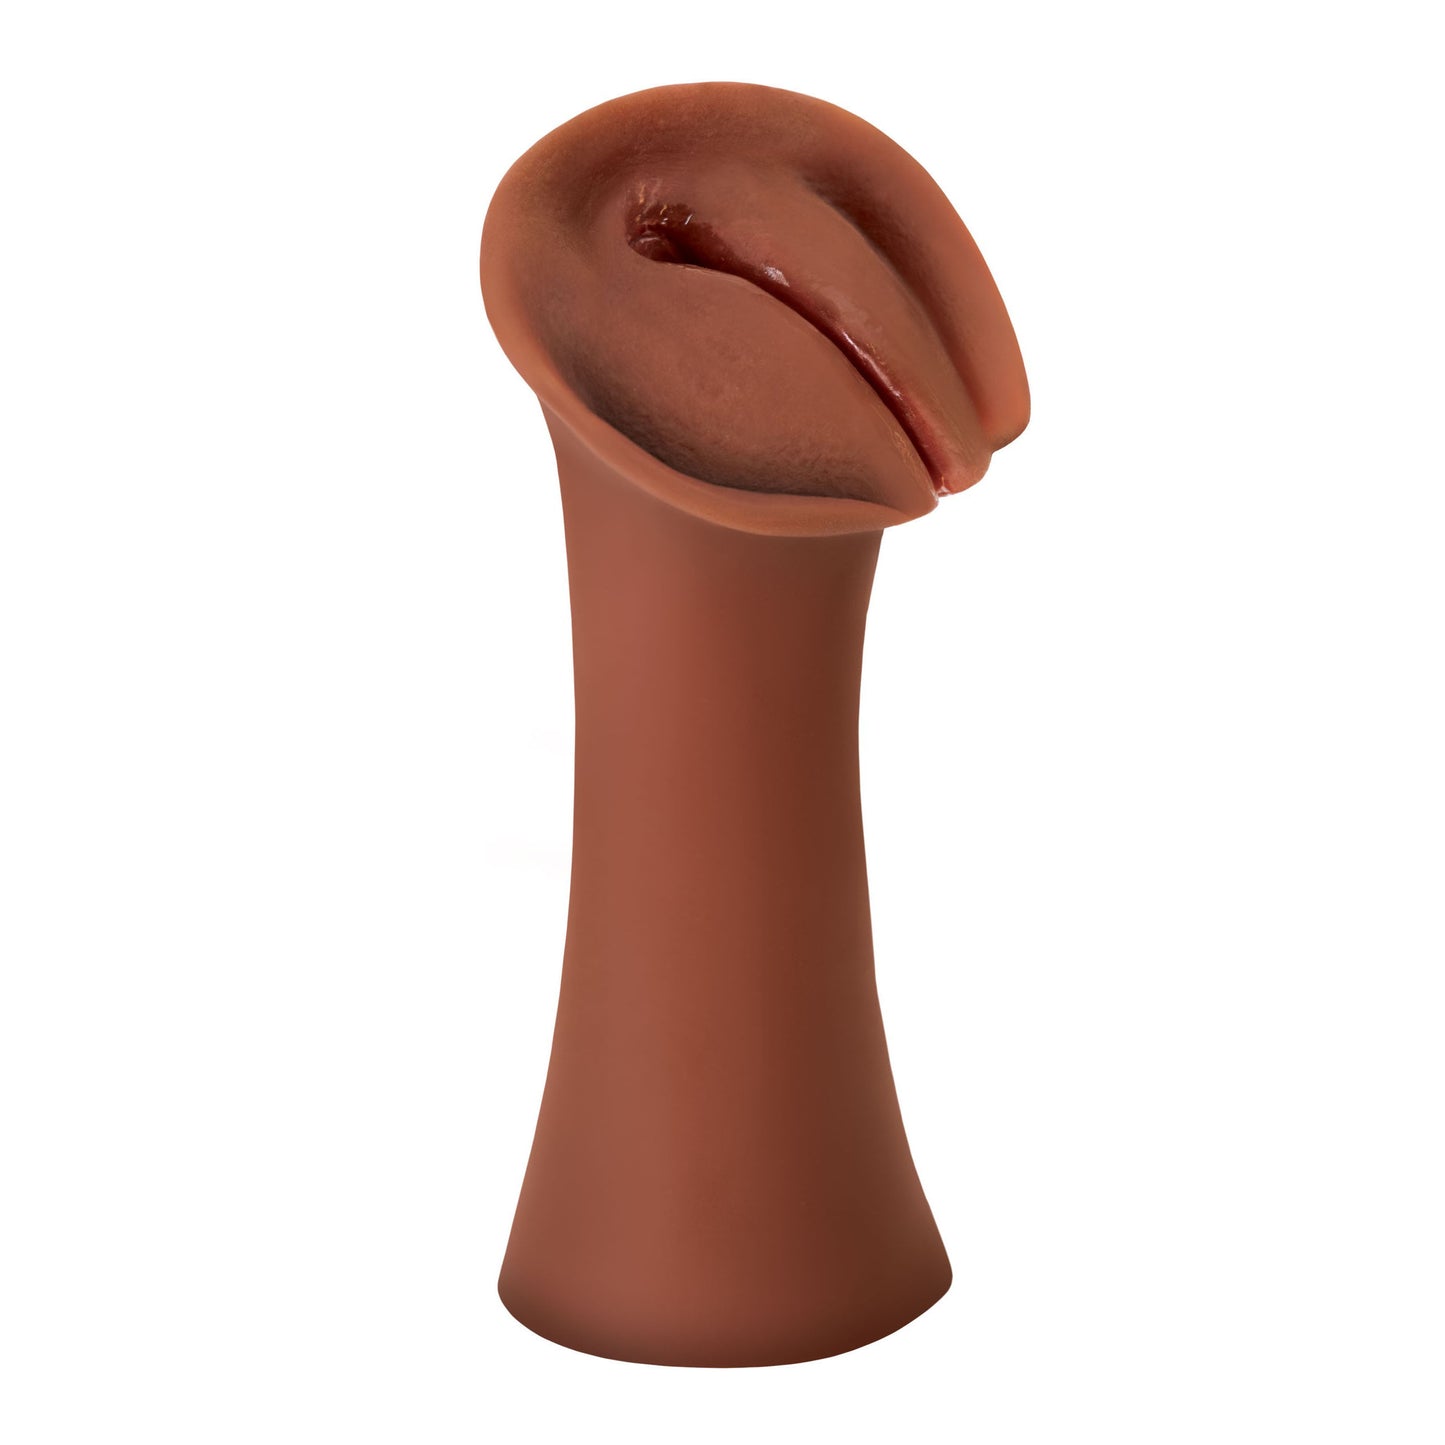 PDX Extreme Wet Pussies Slippery Slit Stroker - Brown